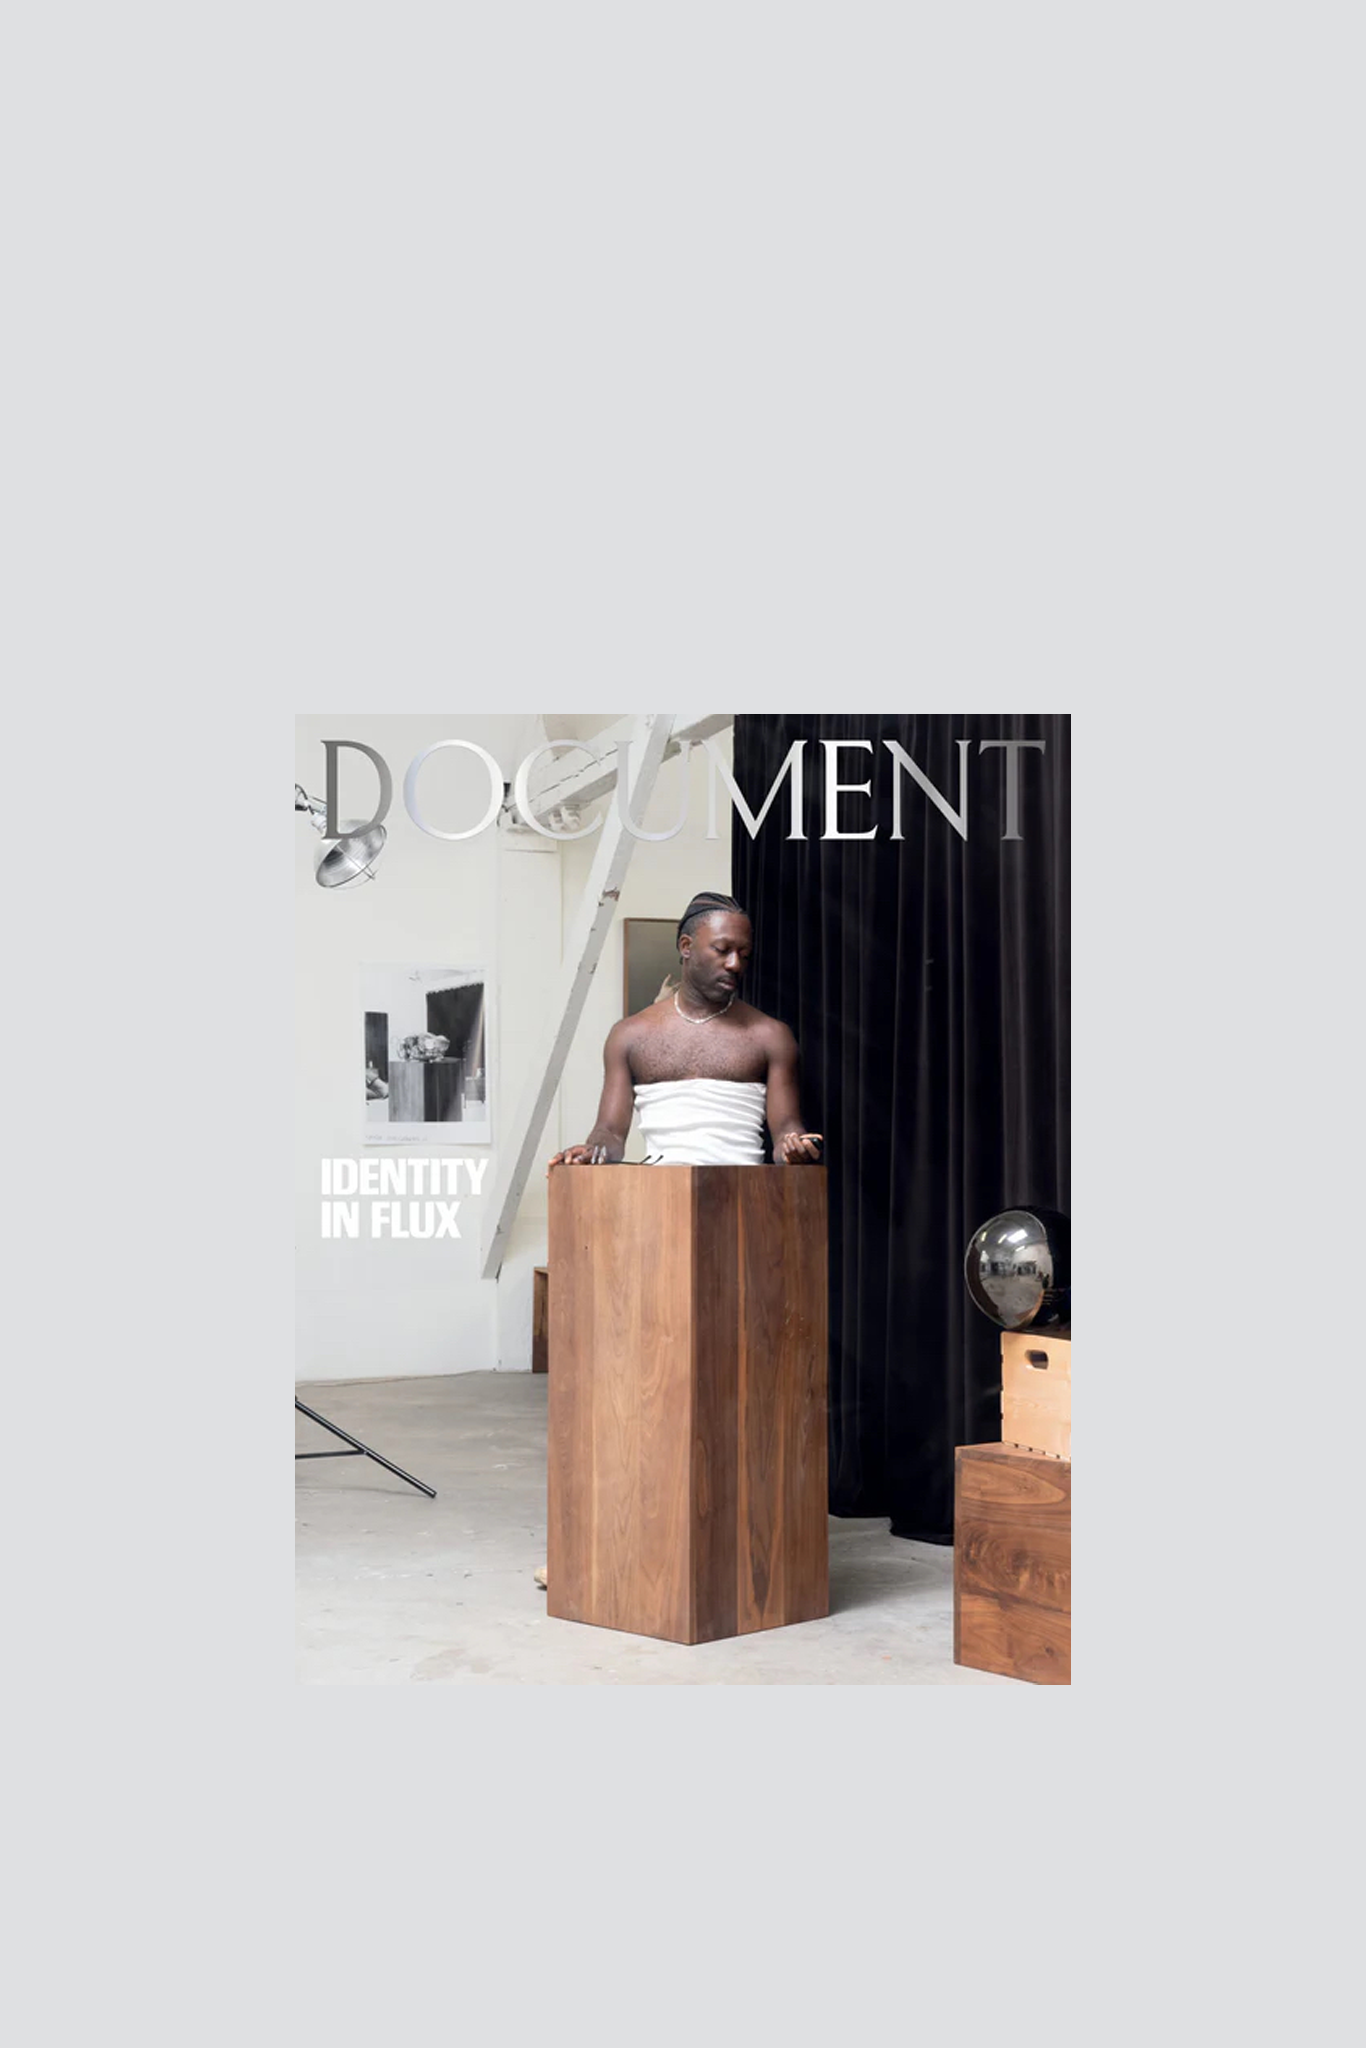 Document Journal - Issue 23